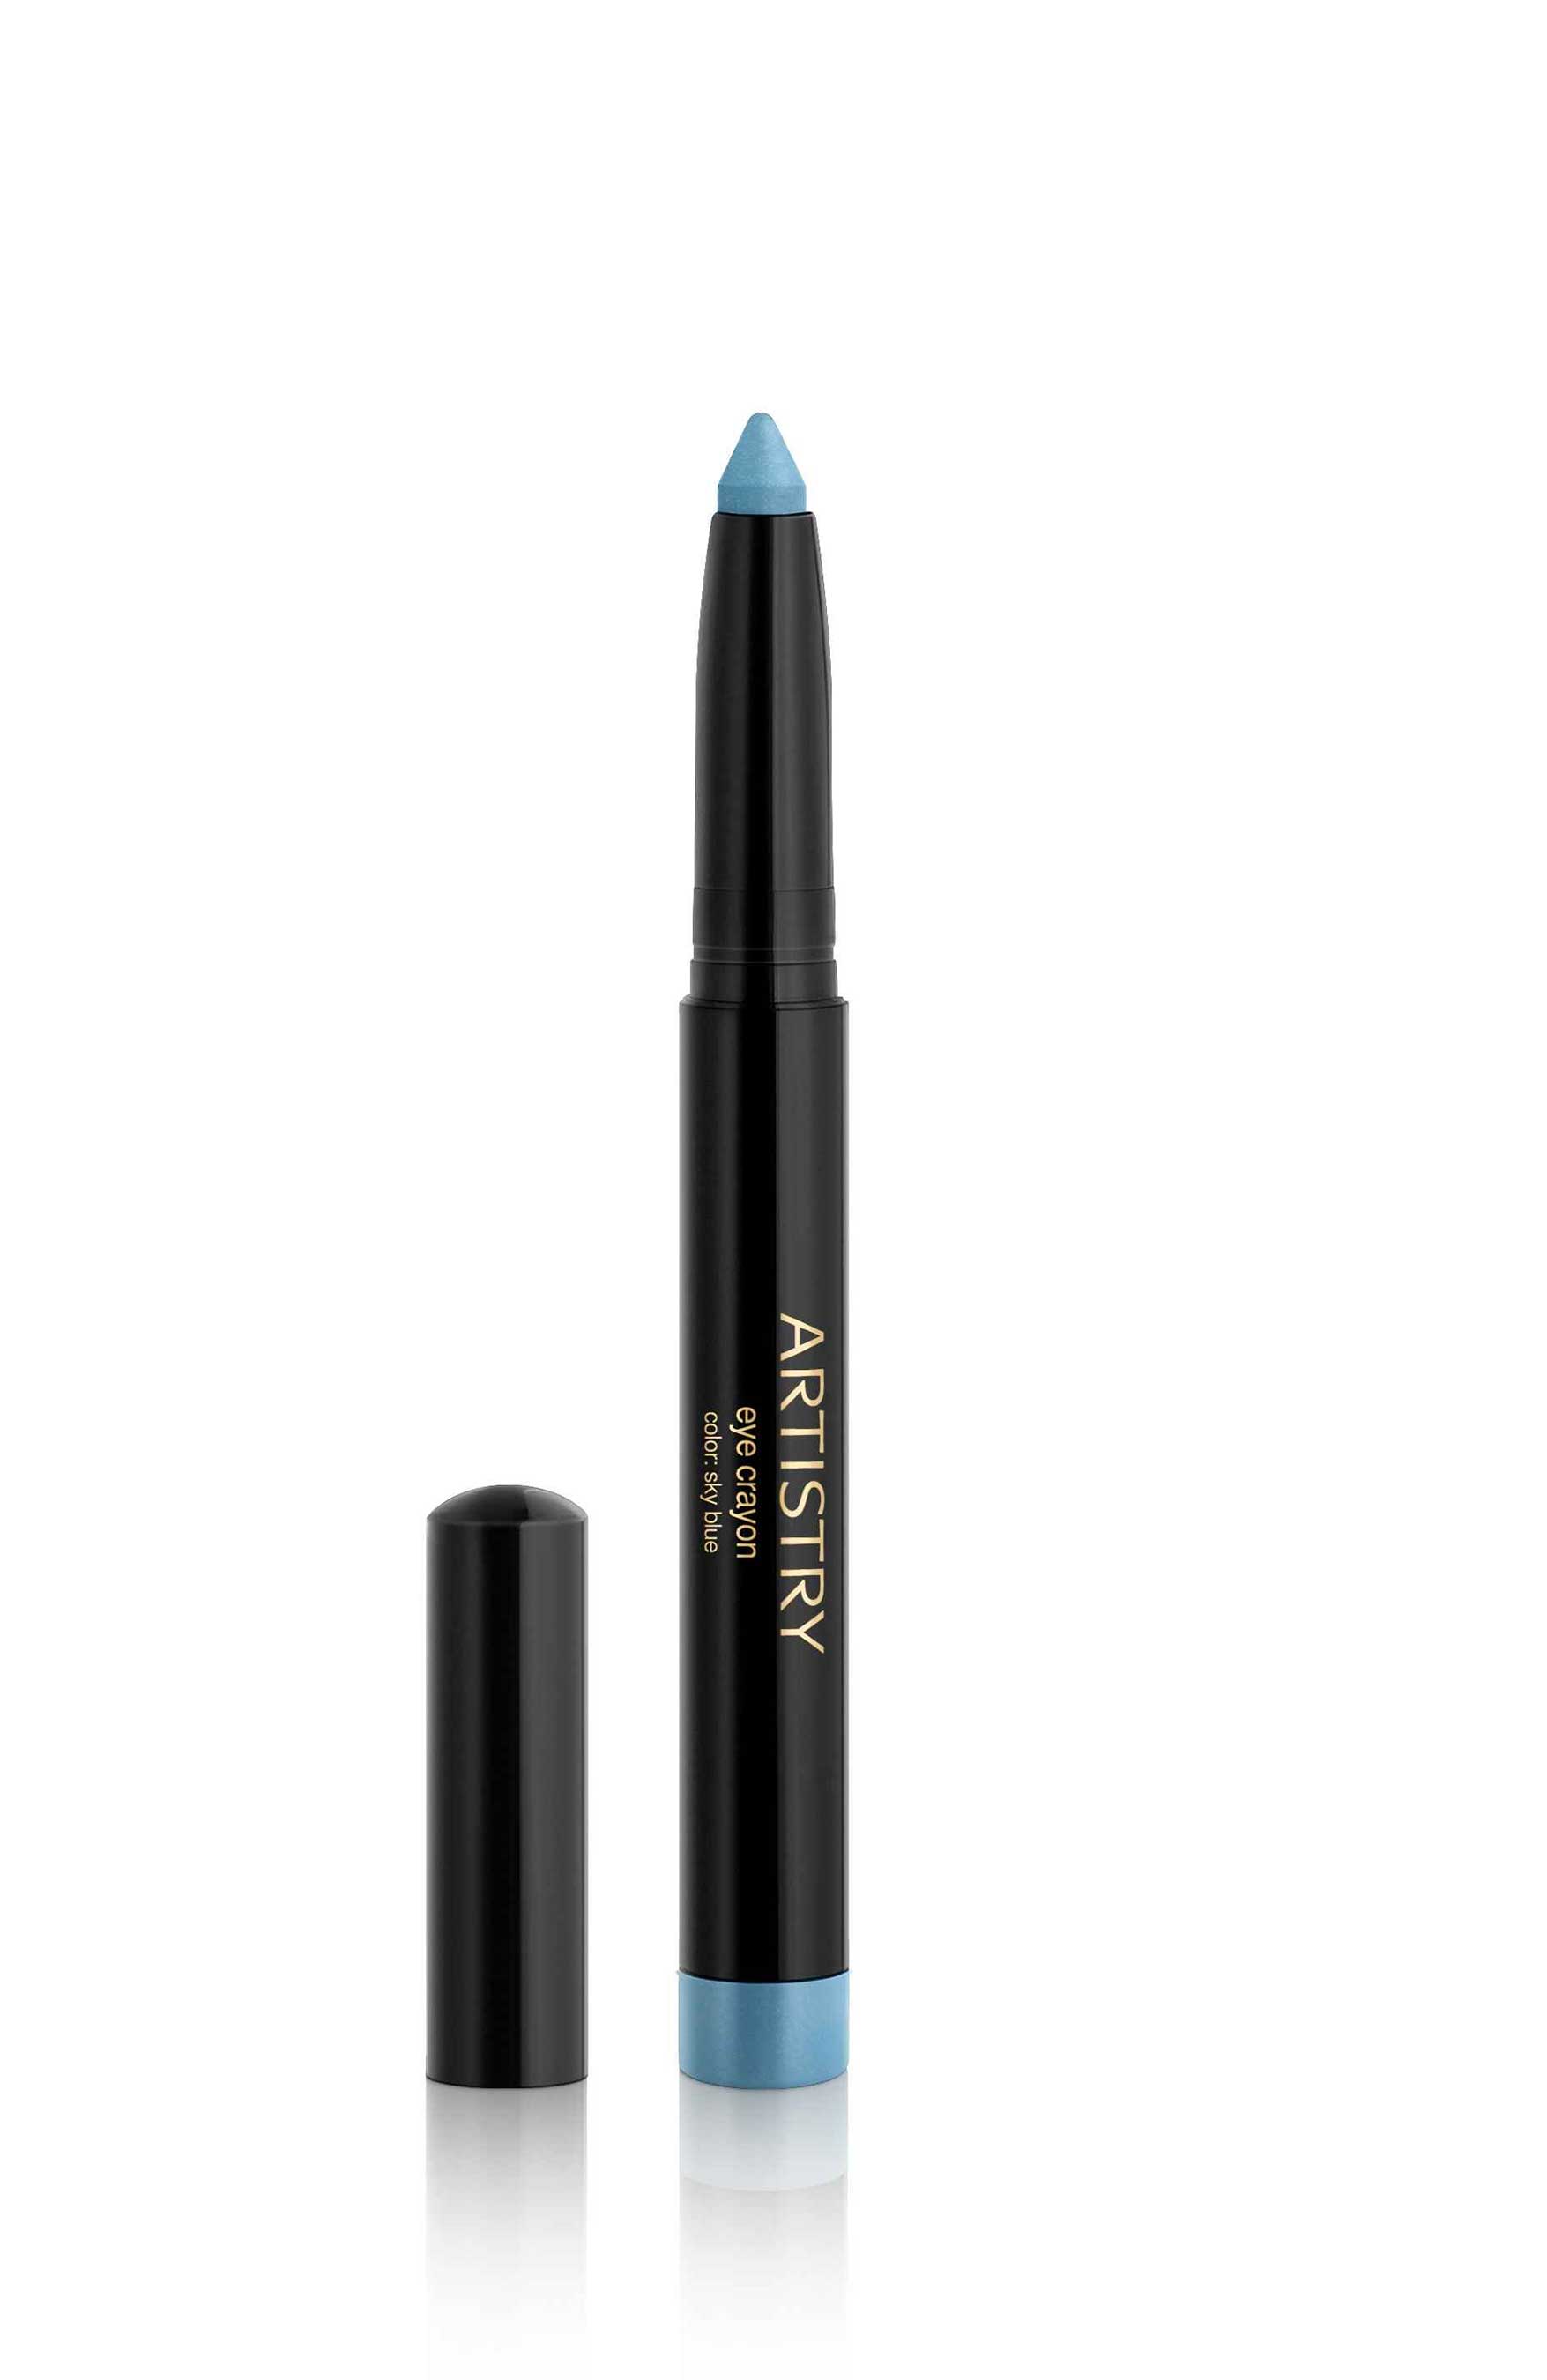 Artistry™ Indigo Skies Eye Crayon in Sky Blue: crayons double as shadows or liners to shade, define and highlight eyes